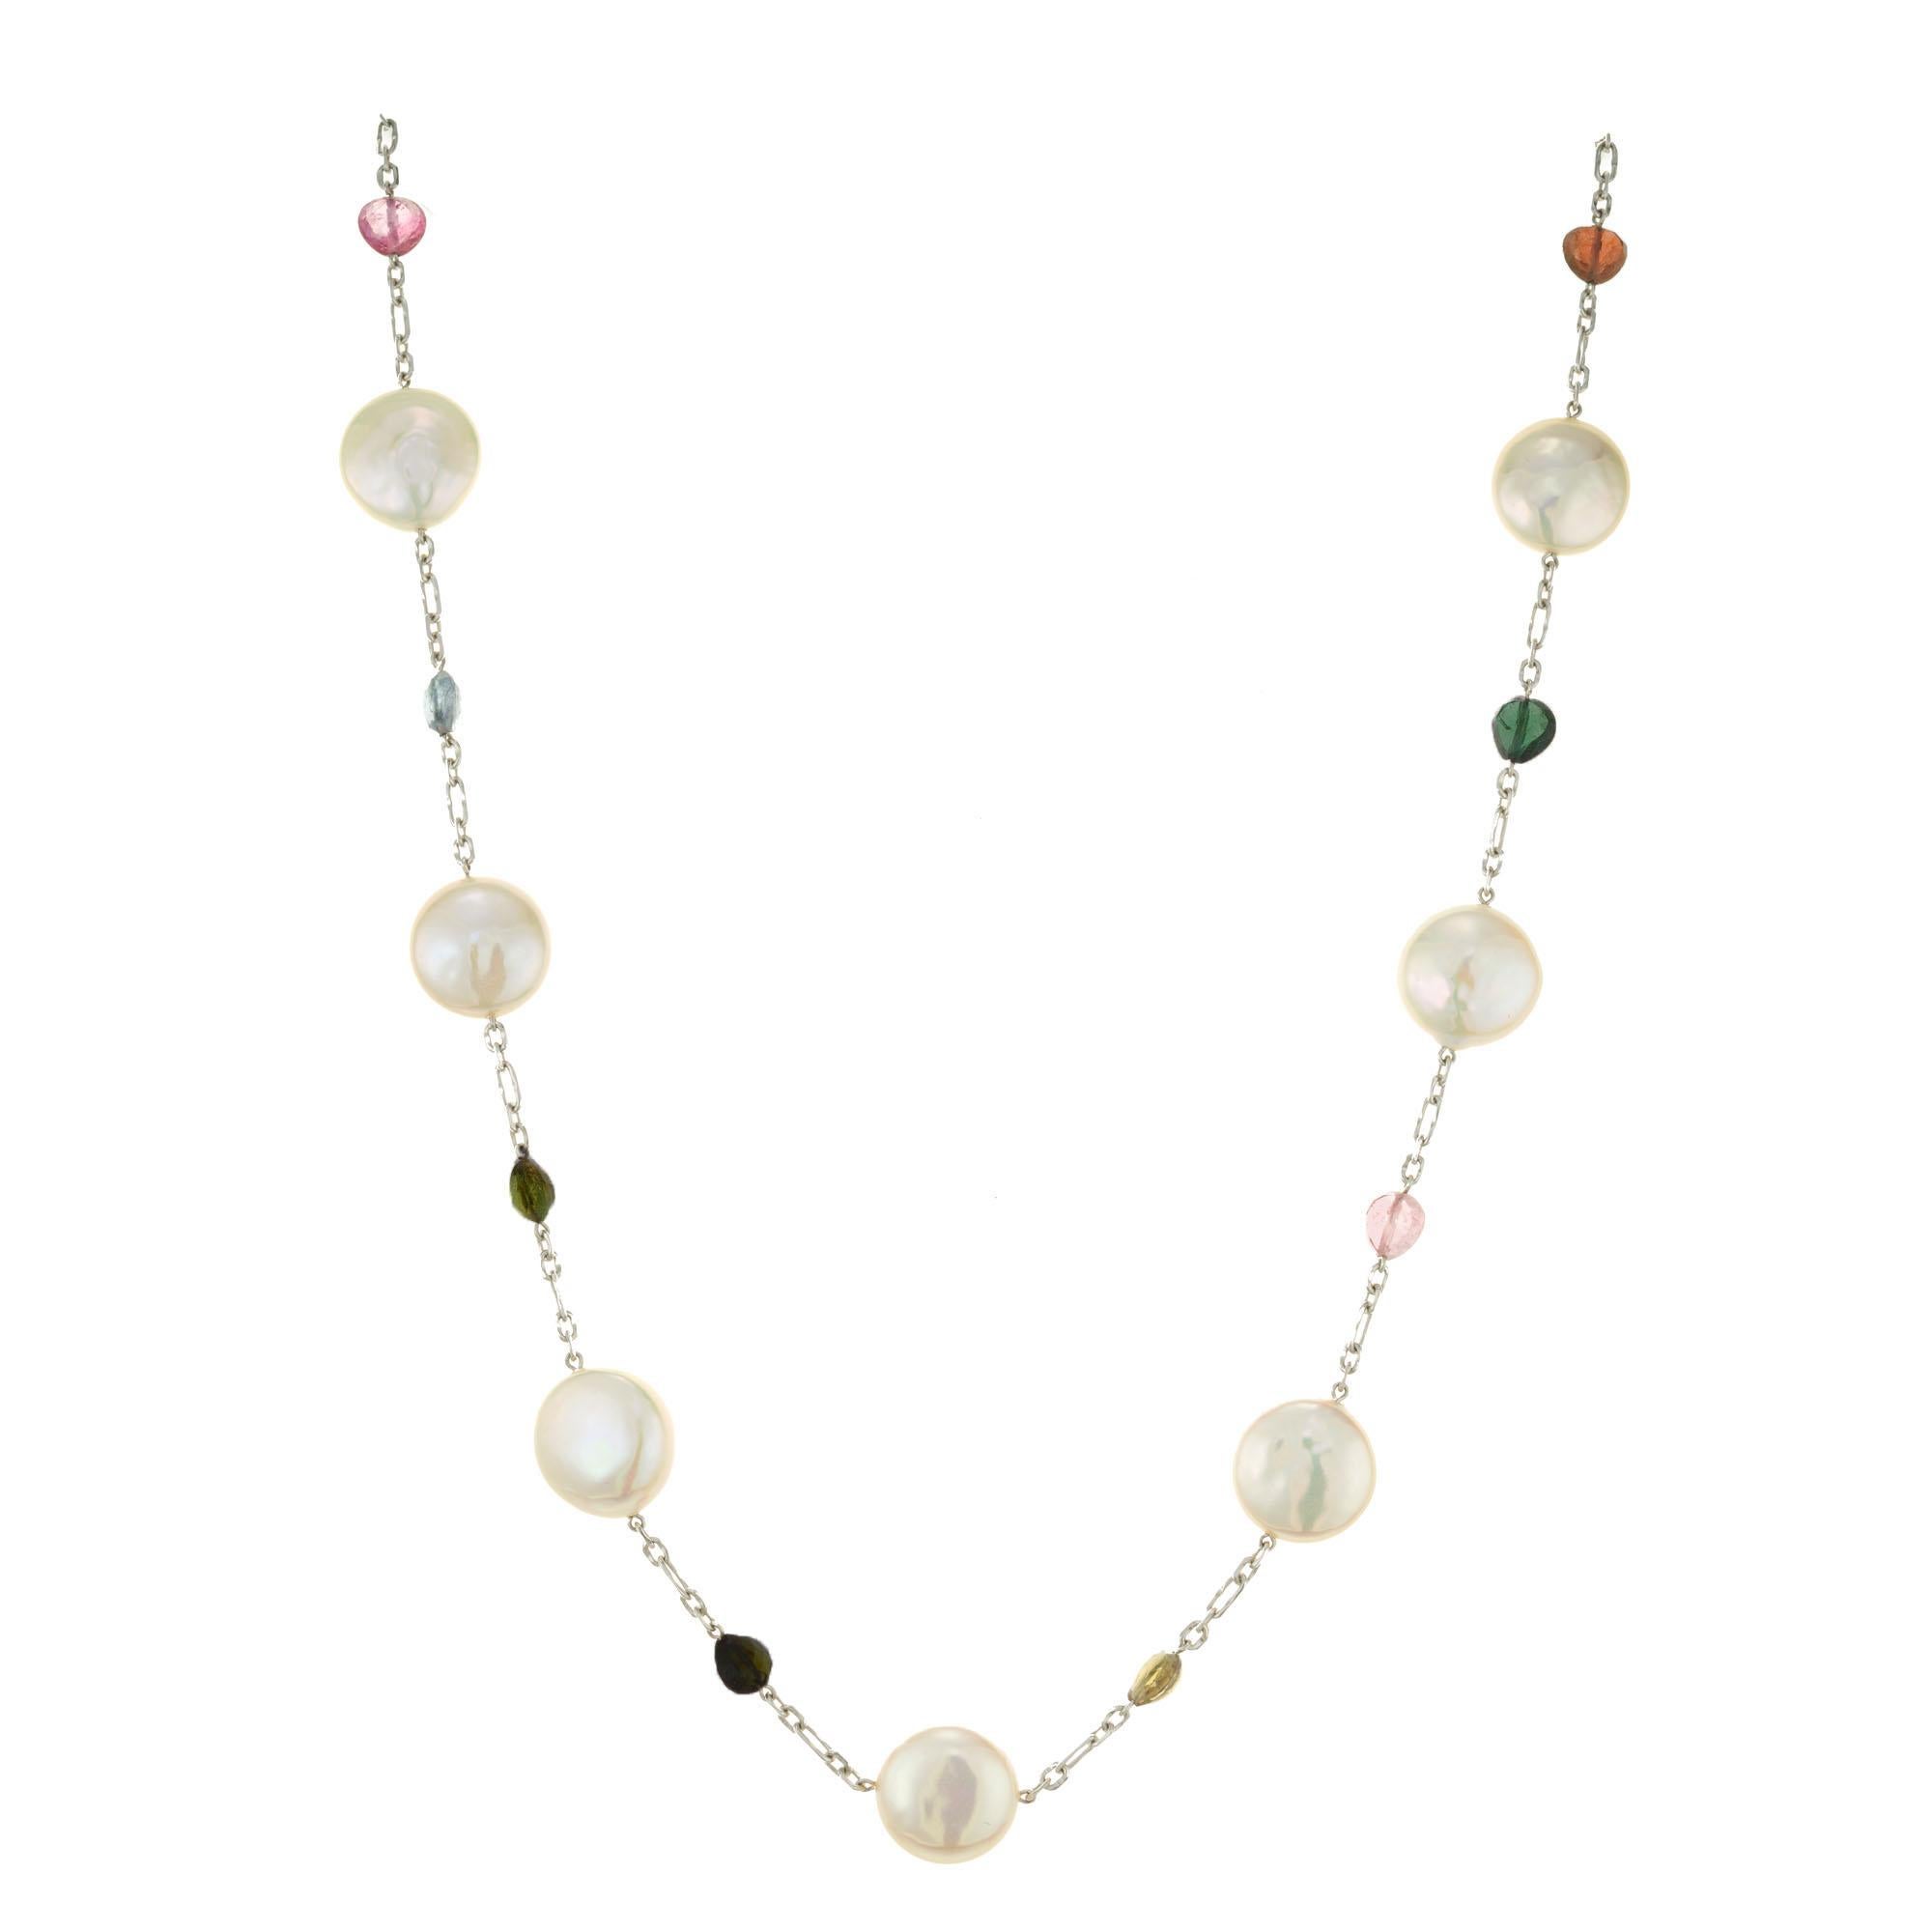 Pearl and tourmaline necklace. 10 fresh water pearls separated by 11 multi-colored tear drop shaped tourmalines. 18k white gold 20 inch link chain. 

10 fresh water round pearls 13.83mm
11 pear shape multi colored tourmalines approx. total weight.